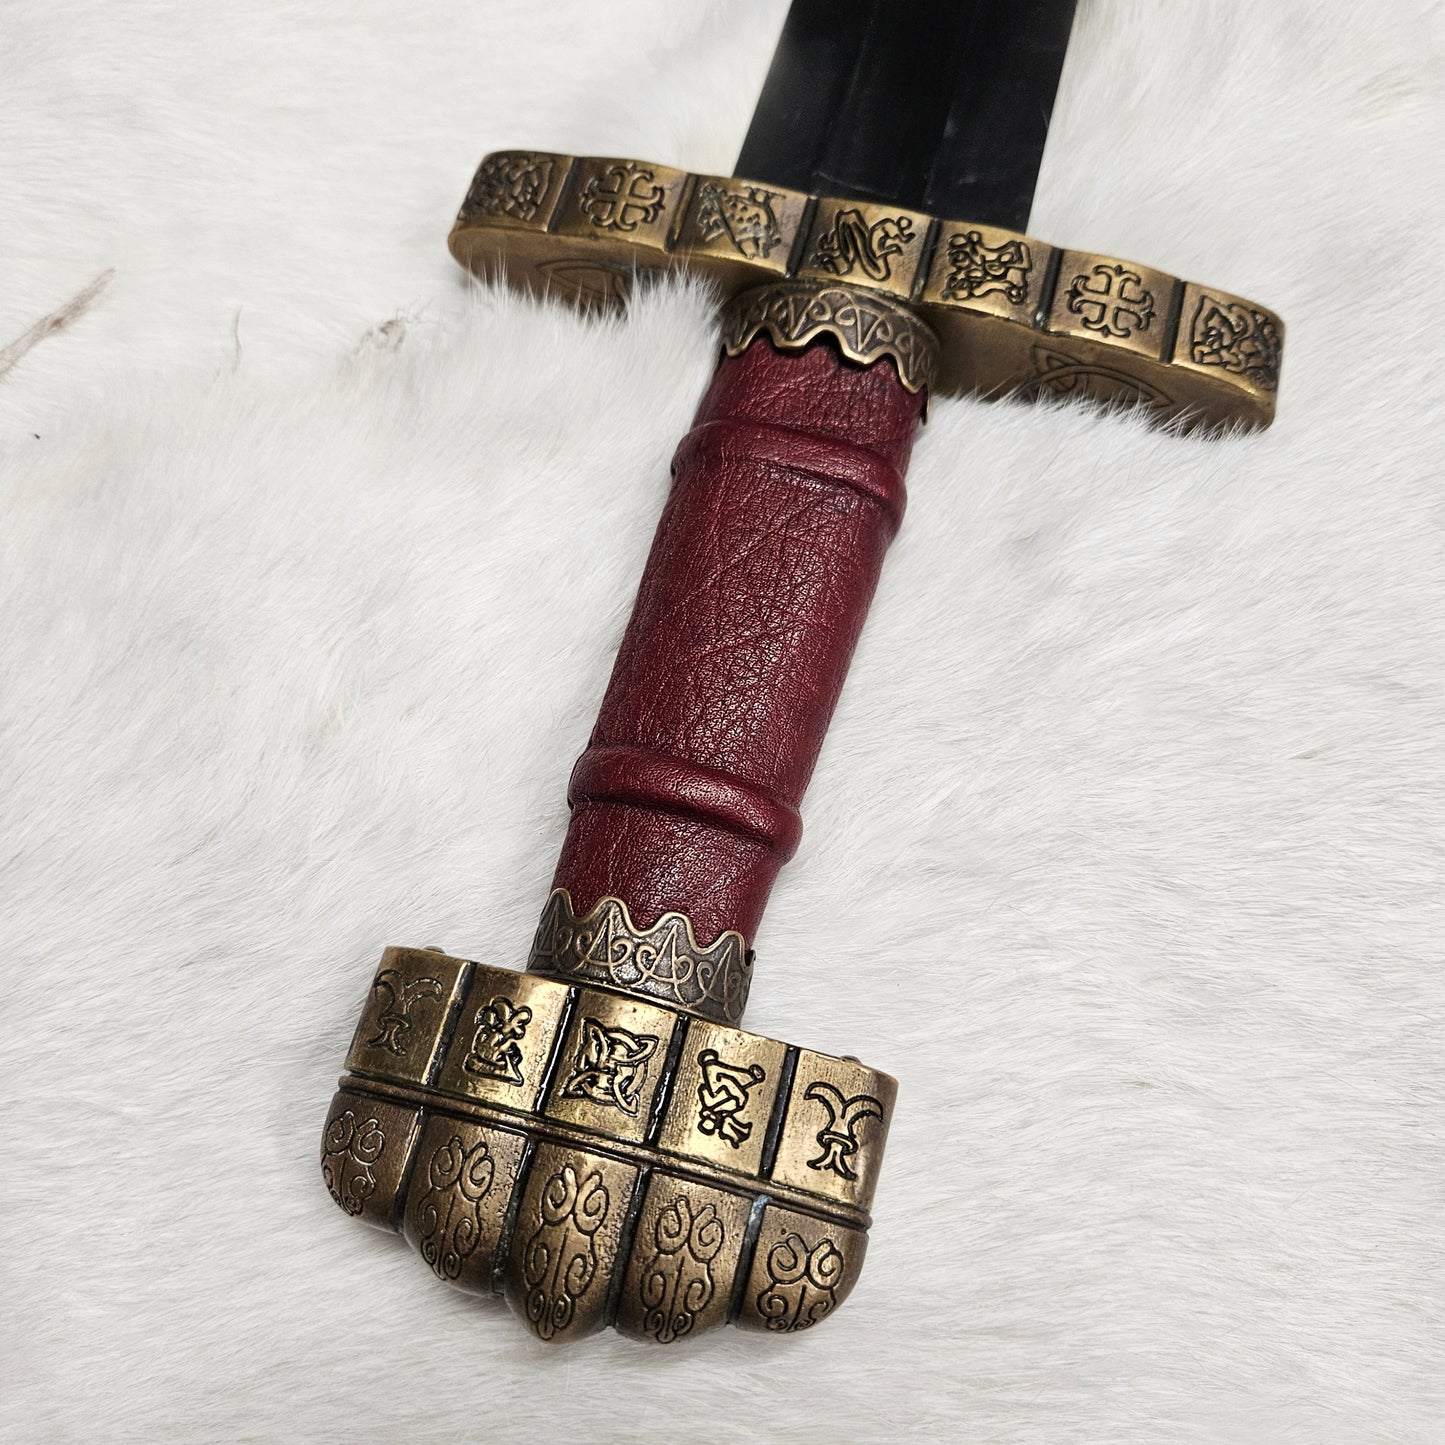 9th Century Hedeby Viking Sword